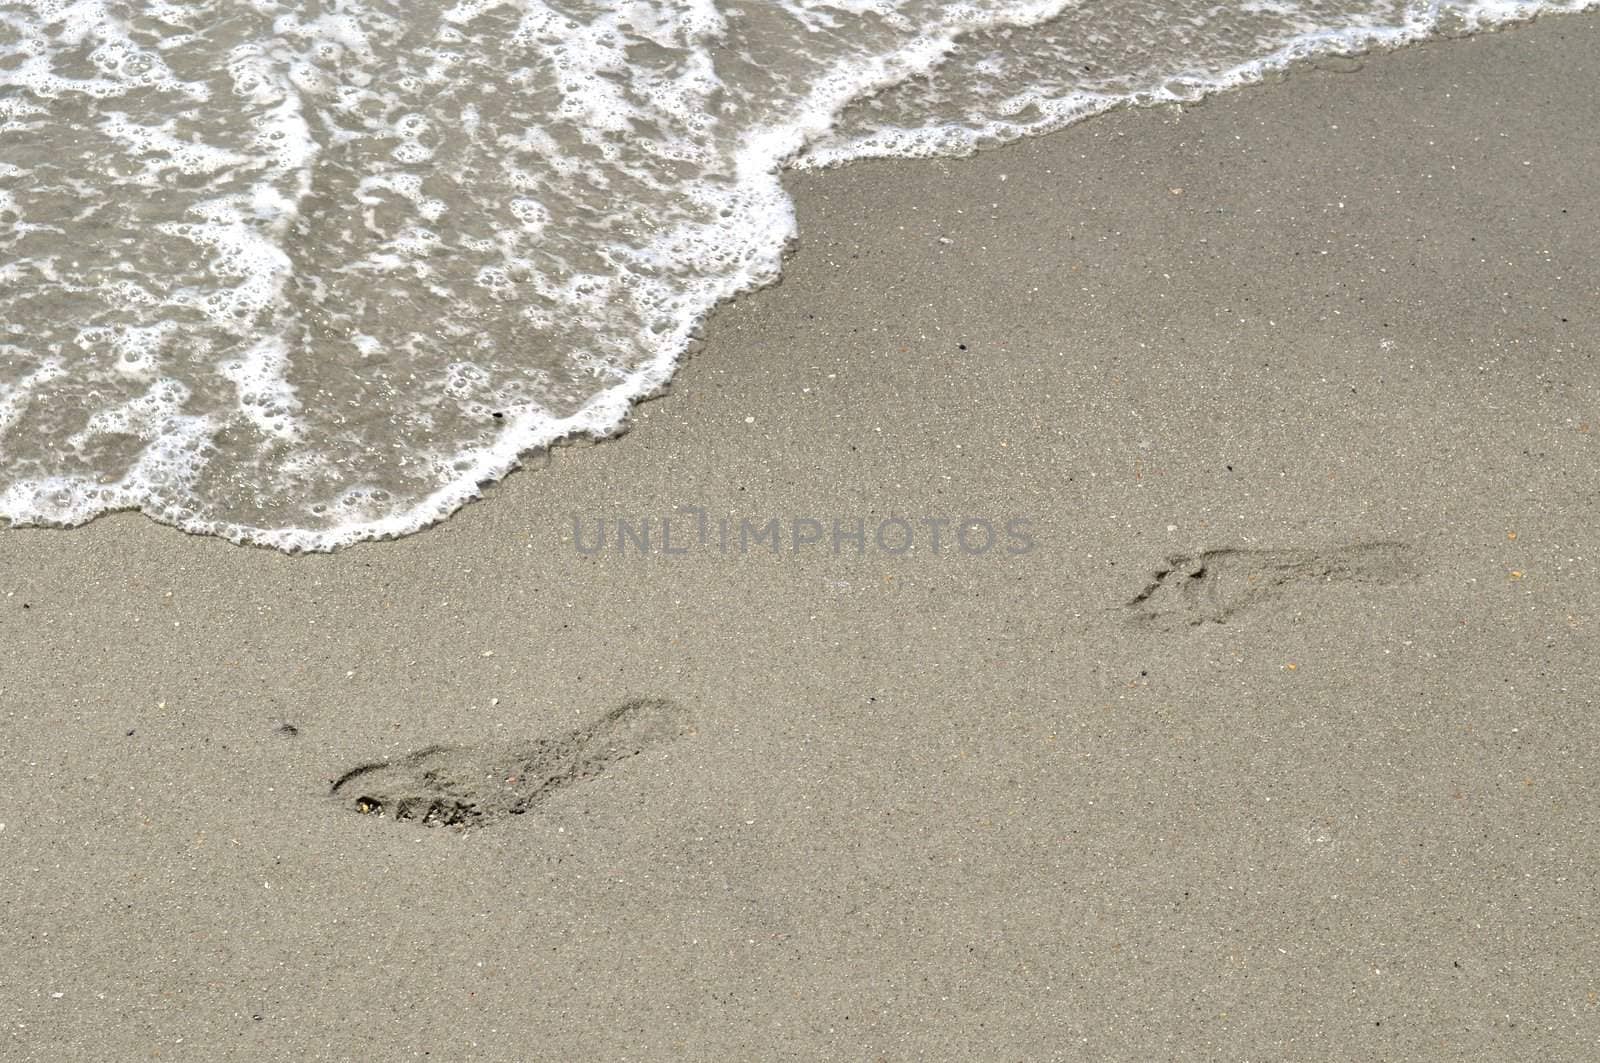 Footsteps in the sand by RefocusPhoto